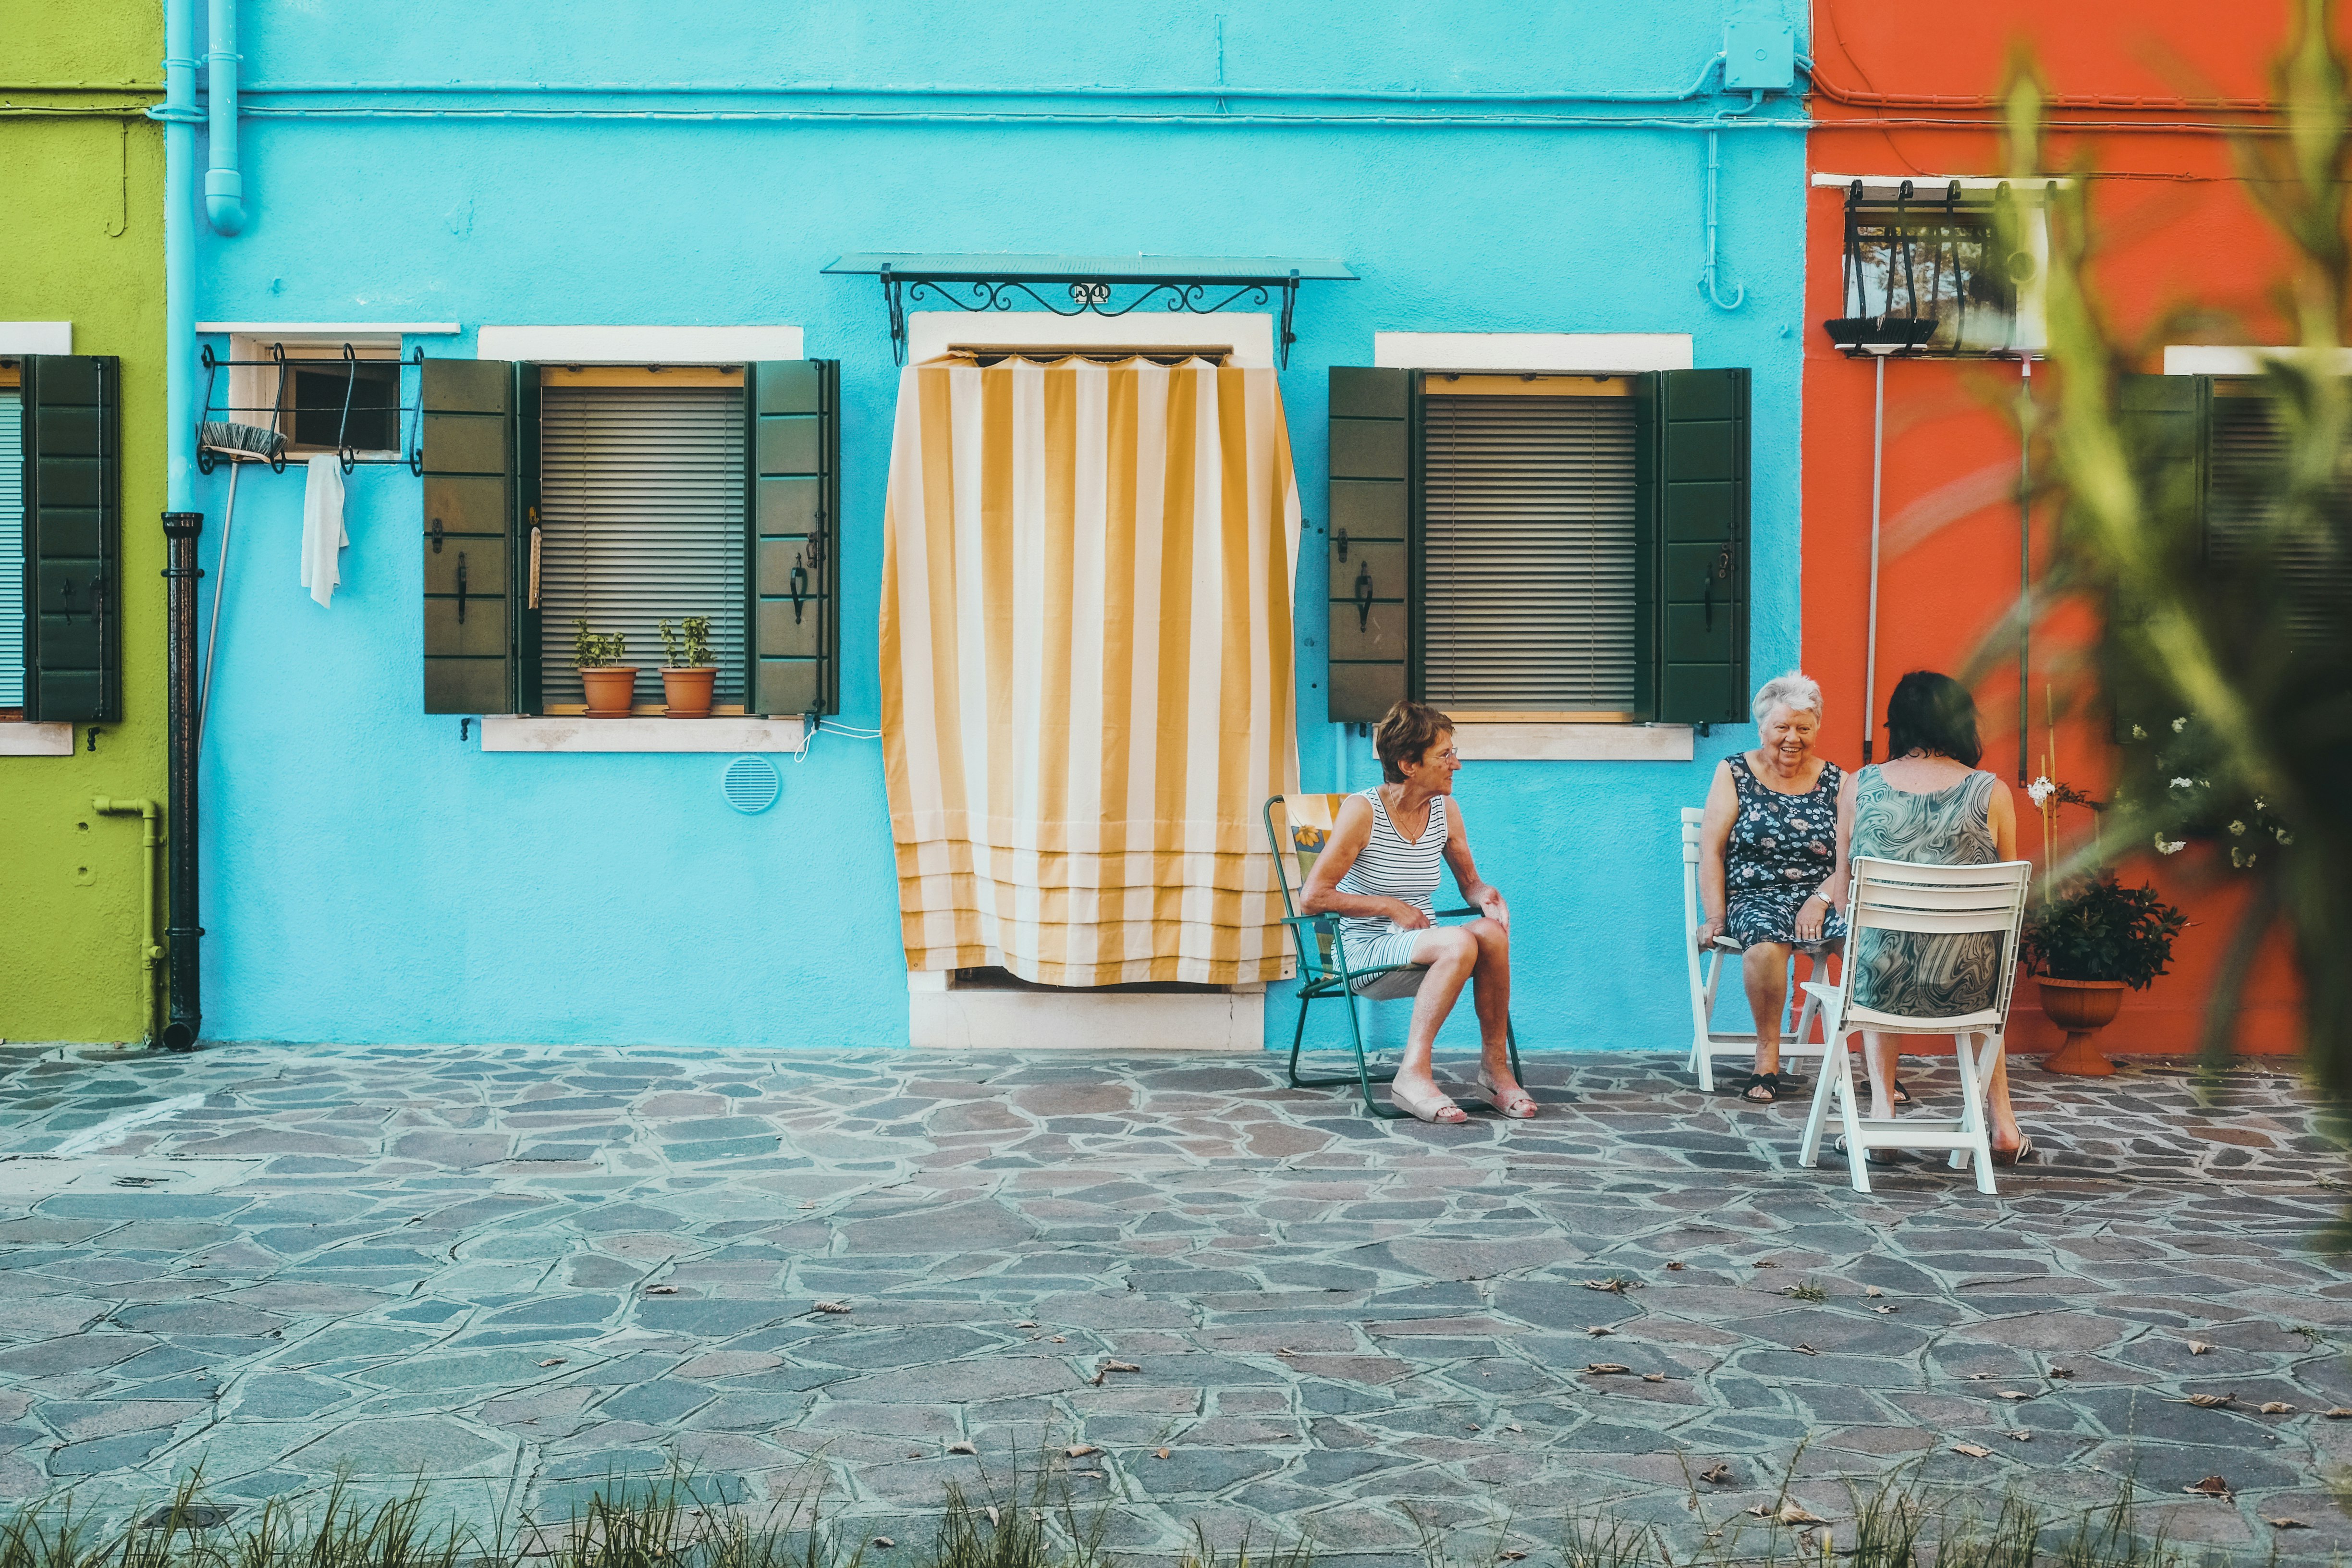 3 women sitting on white plastic chairs in front of blue and teal concrete house during